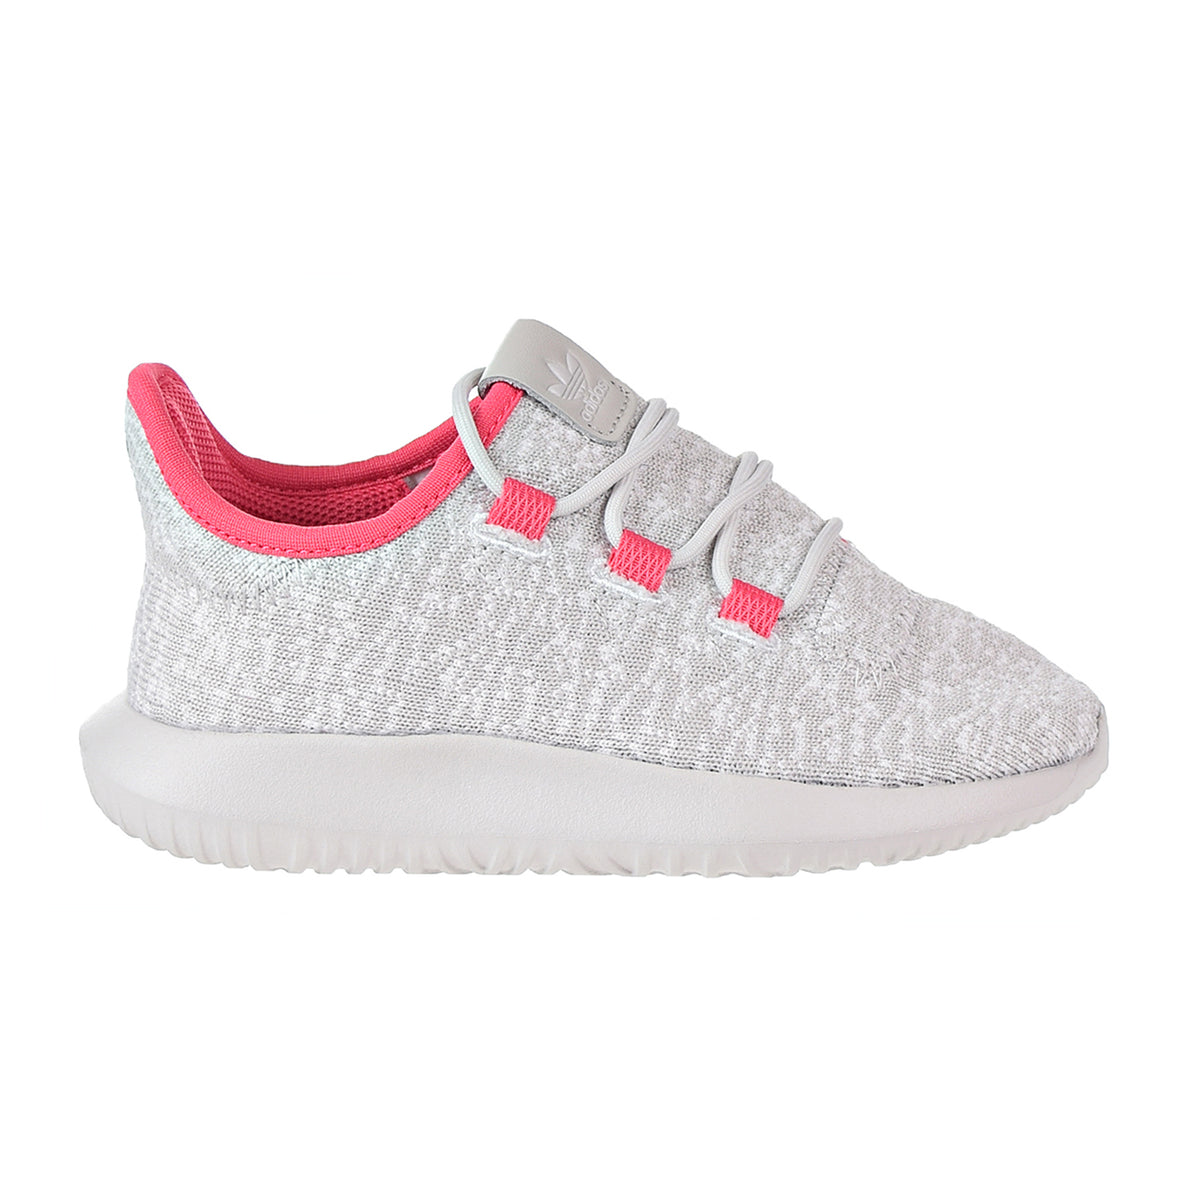 Adidas C Kid's Grey One/Real Pink/Grey One